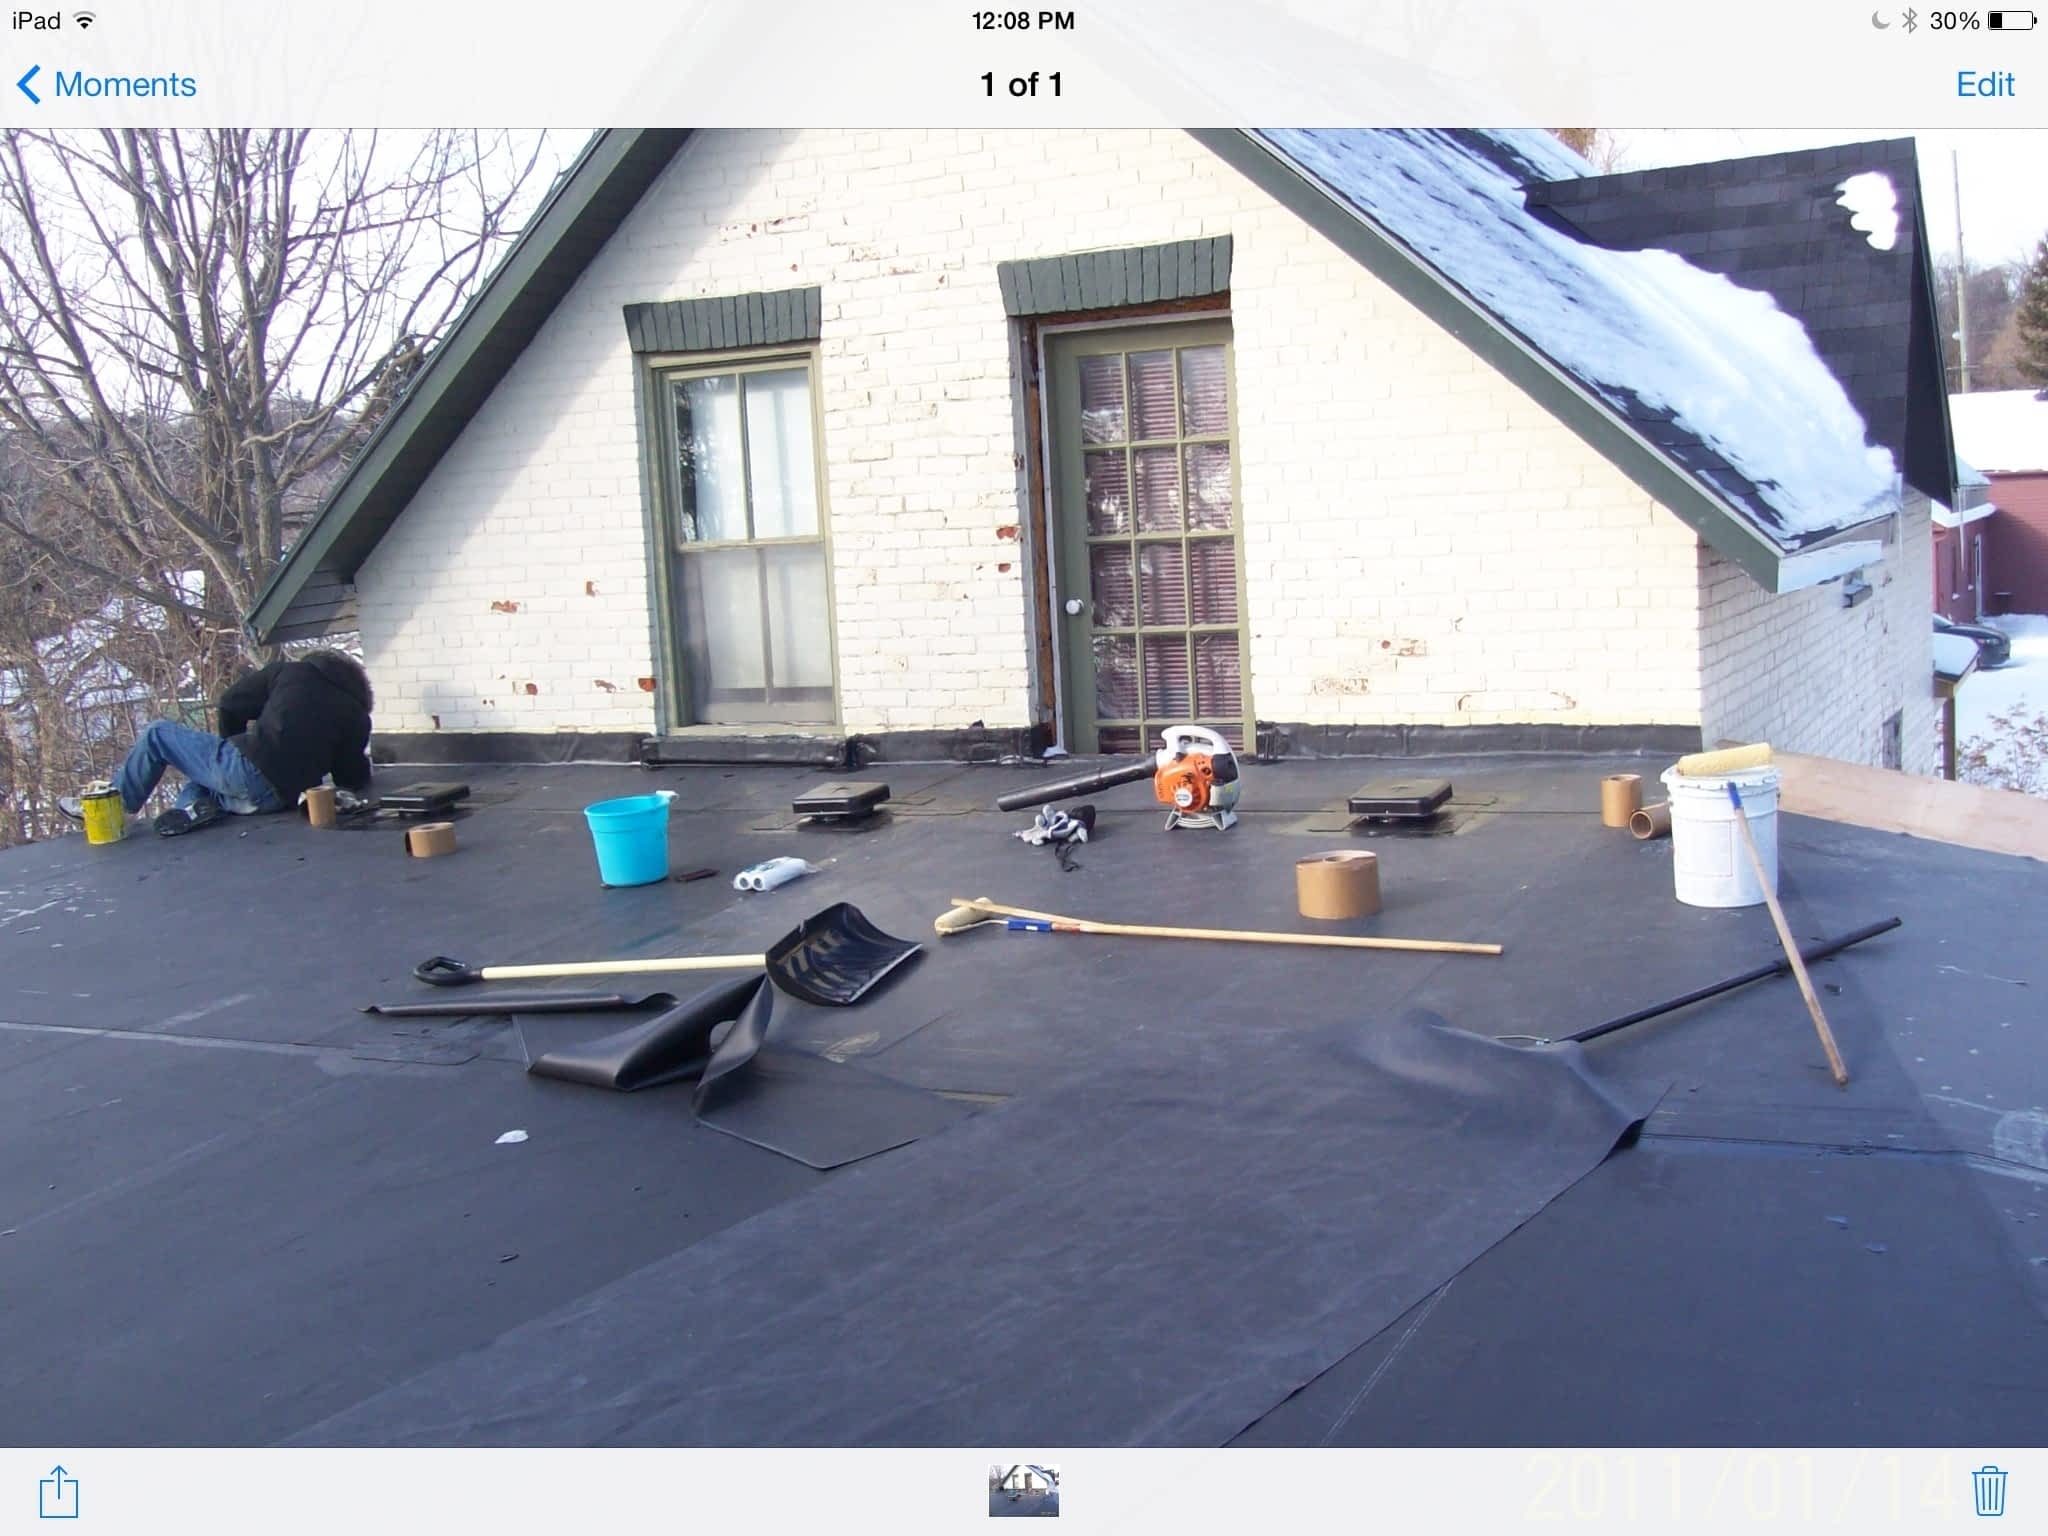 photo Weathergard Roofing and Eavestroughs